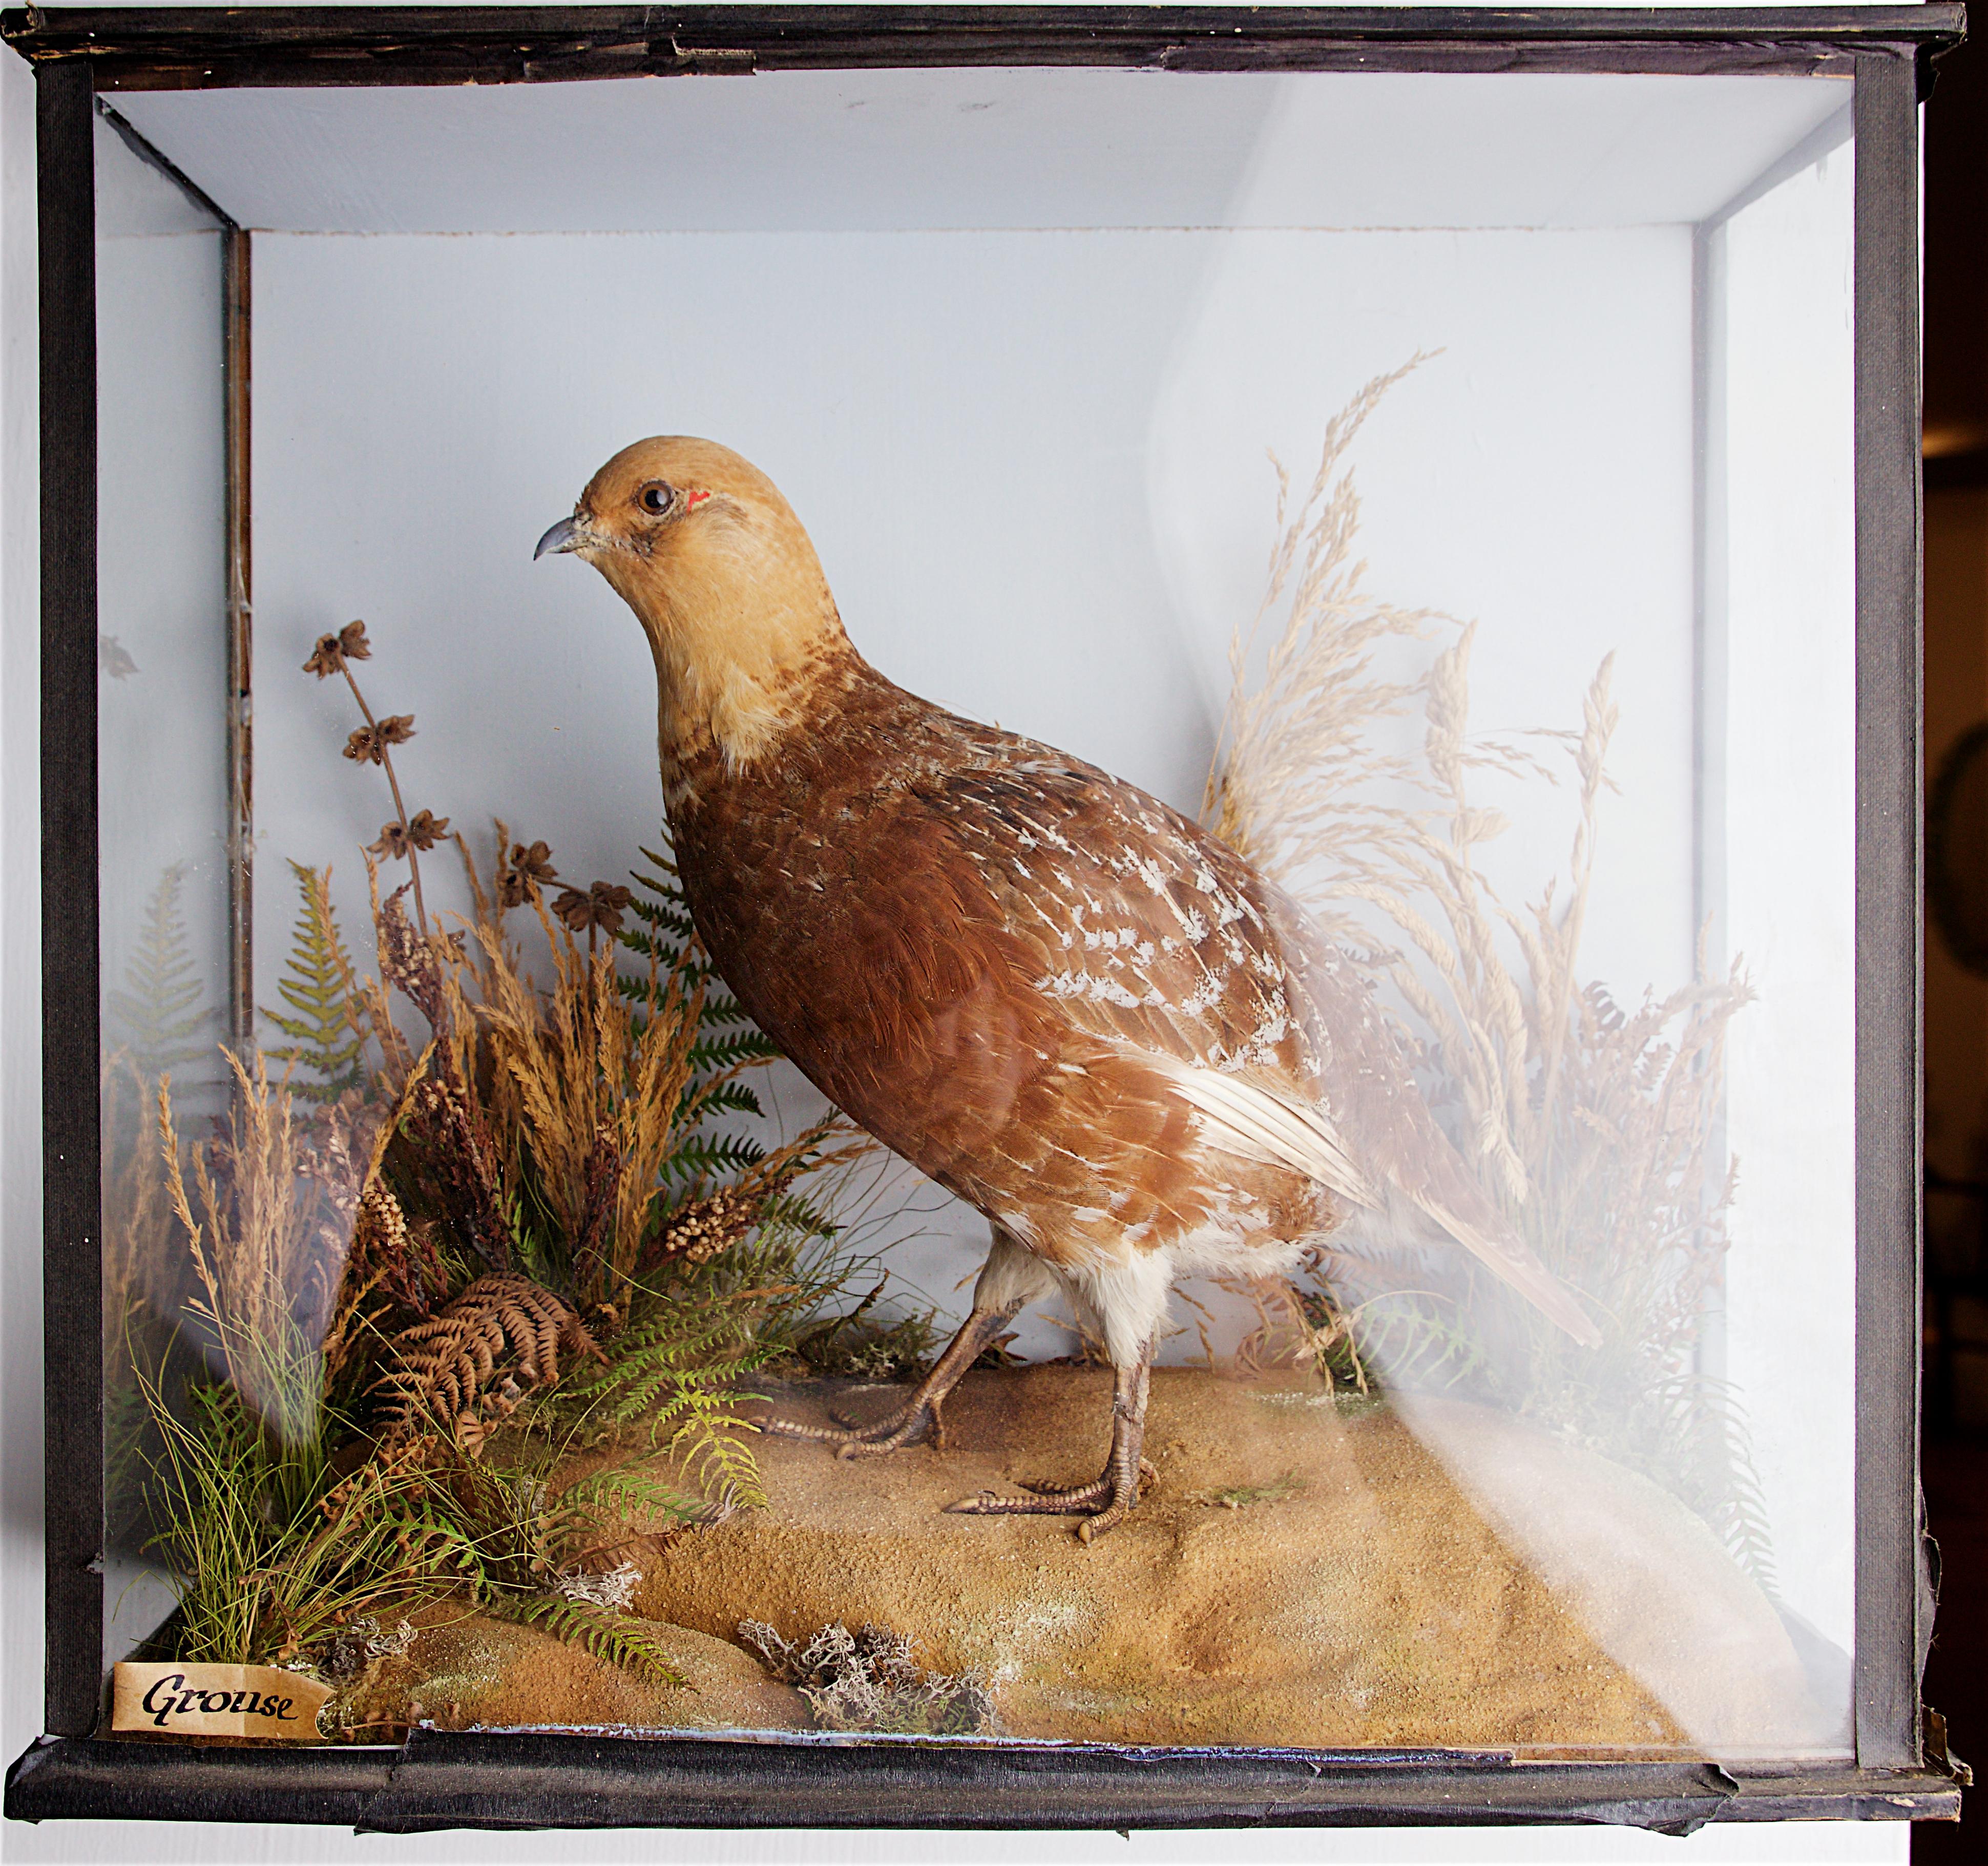 Well-mounted taxidermy grouse, early 20th century.